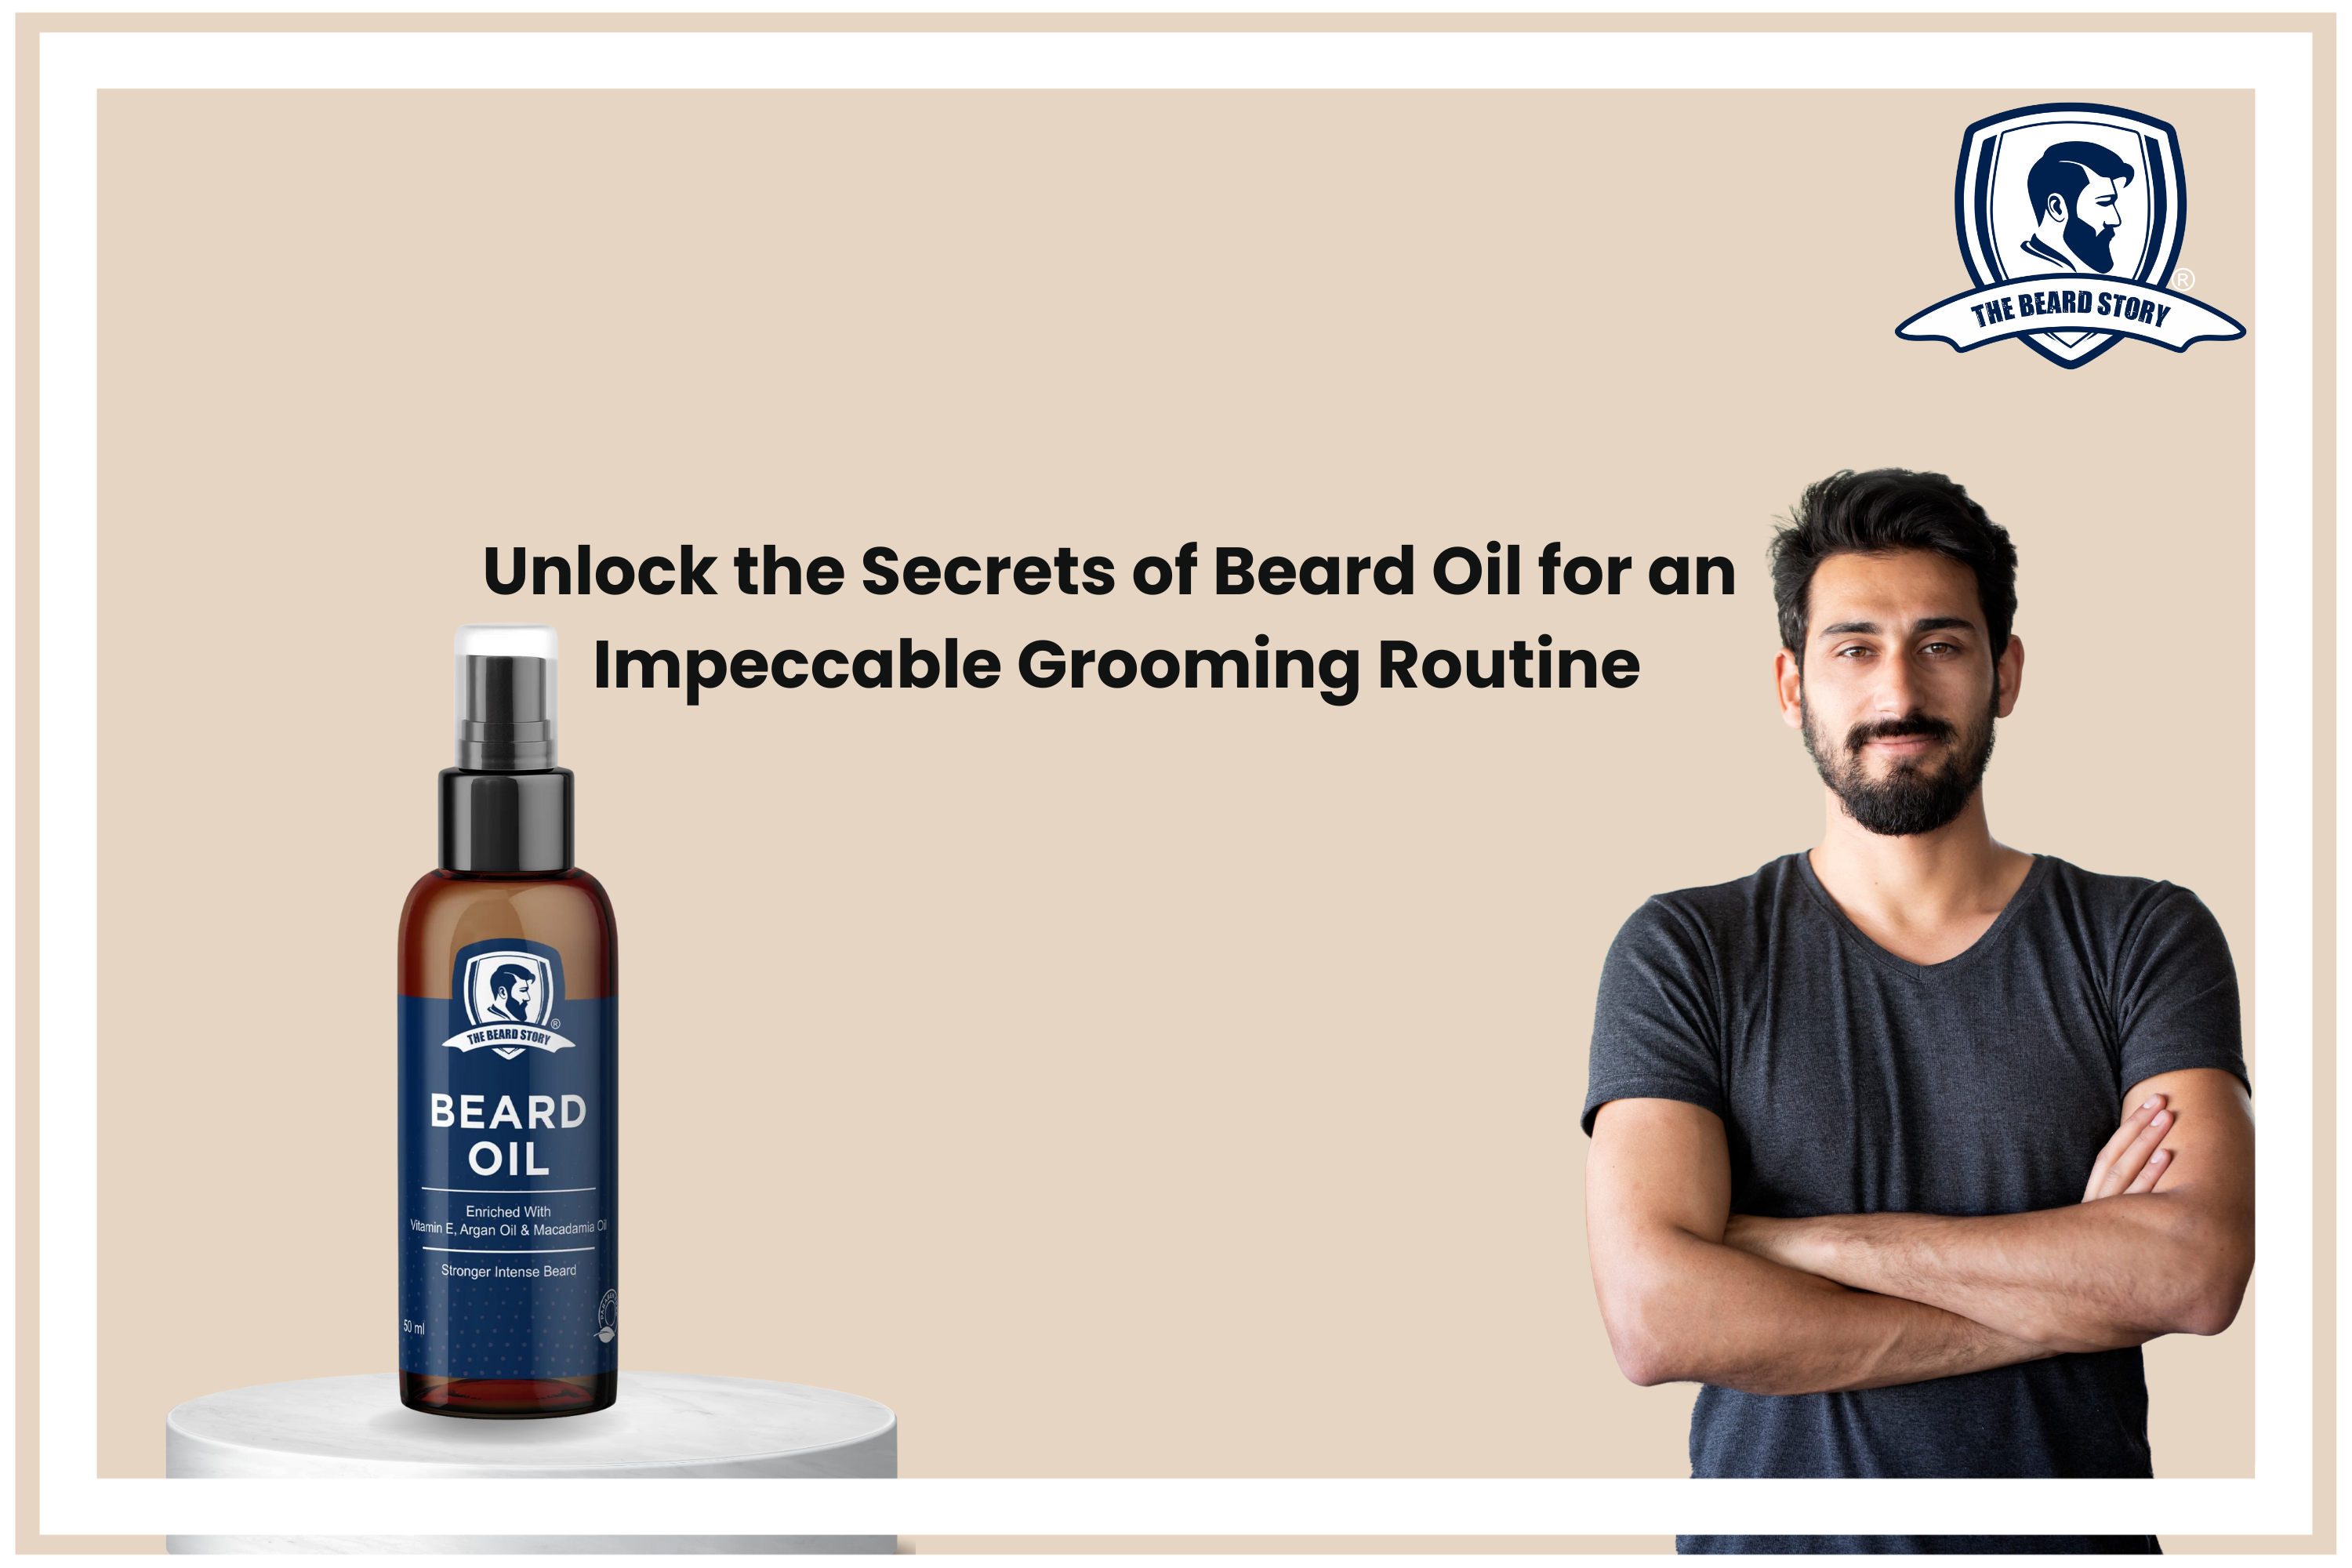 Unlock the Secrets of Beard Oil for an Impeccable Grooming Routine